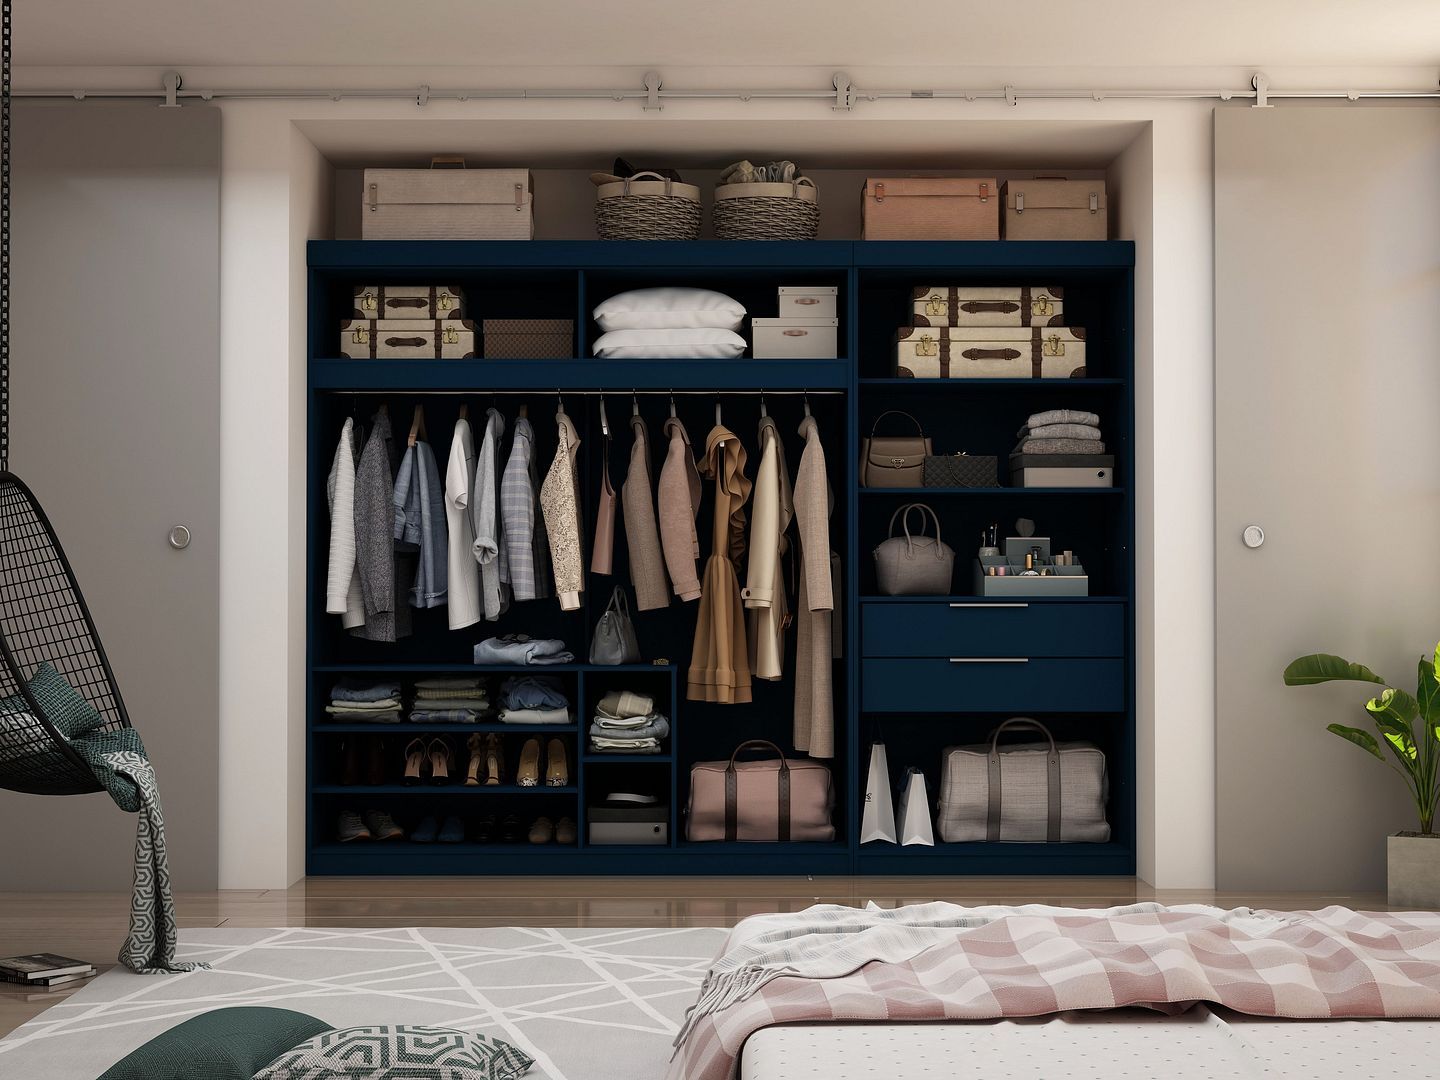 Mulberry 2-Sectional Open Closet Module Wardrobe System